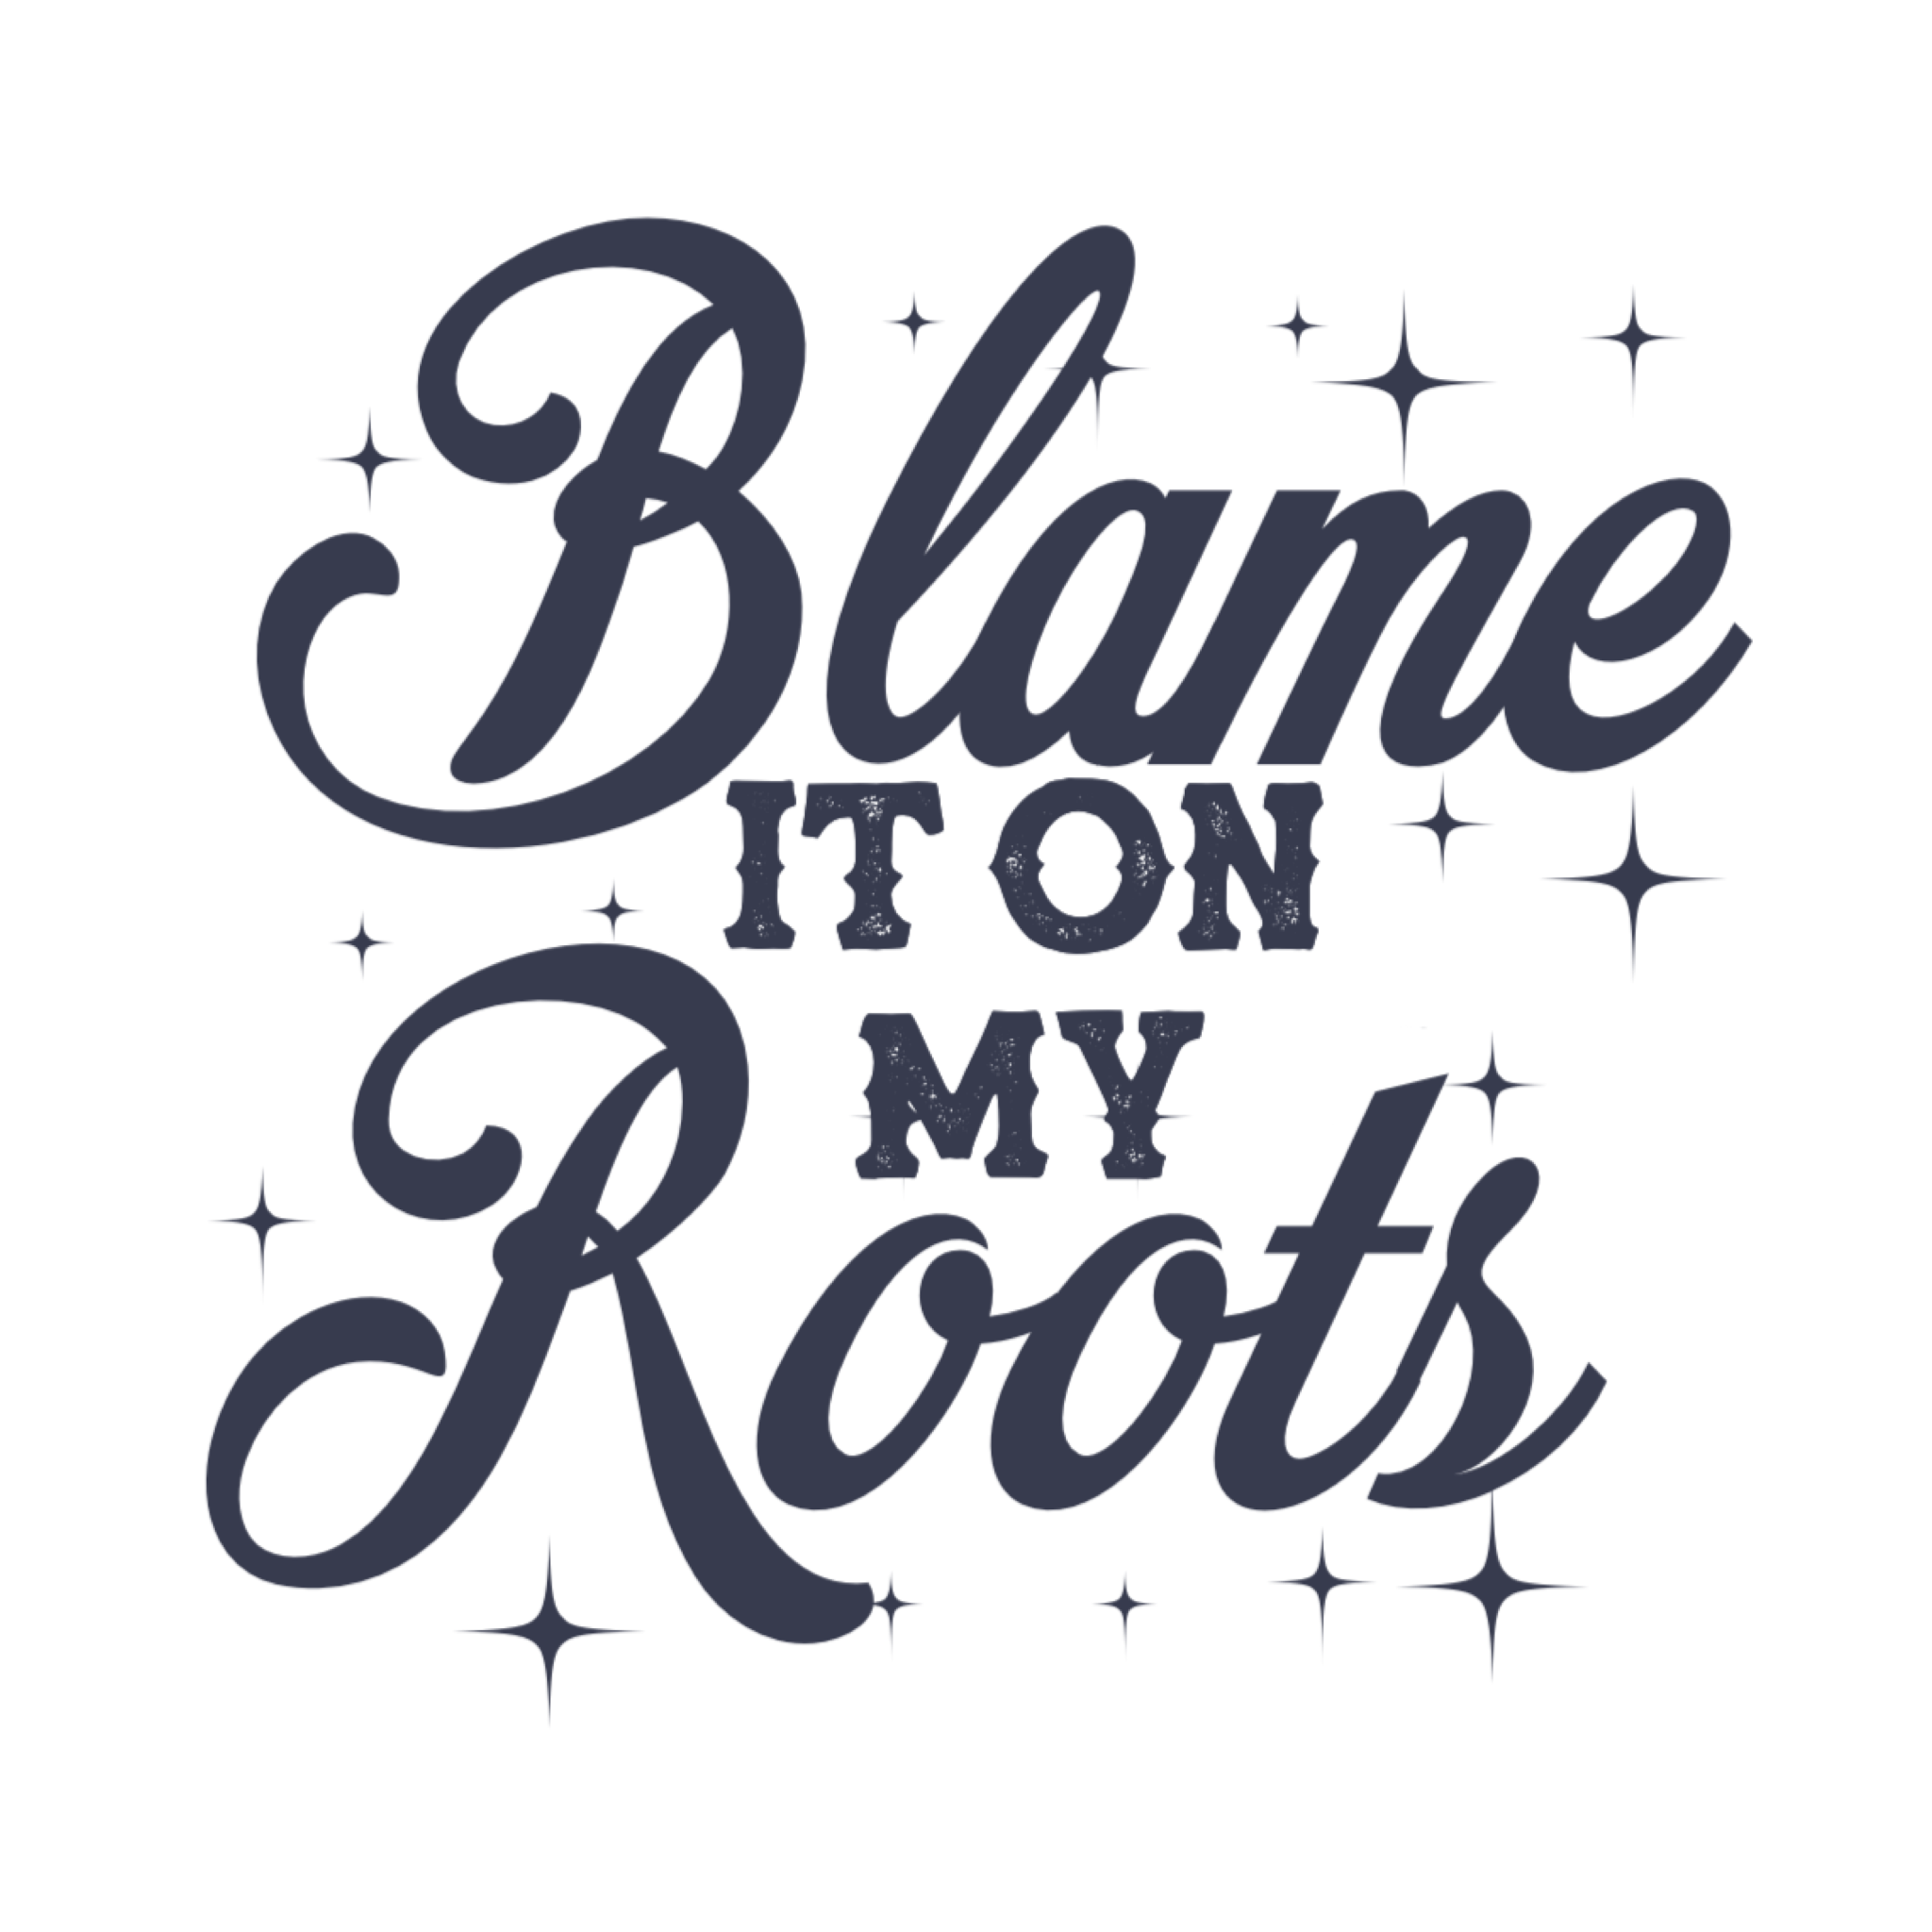 Blame It On My Roots